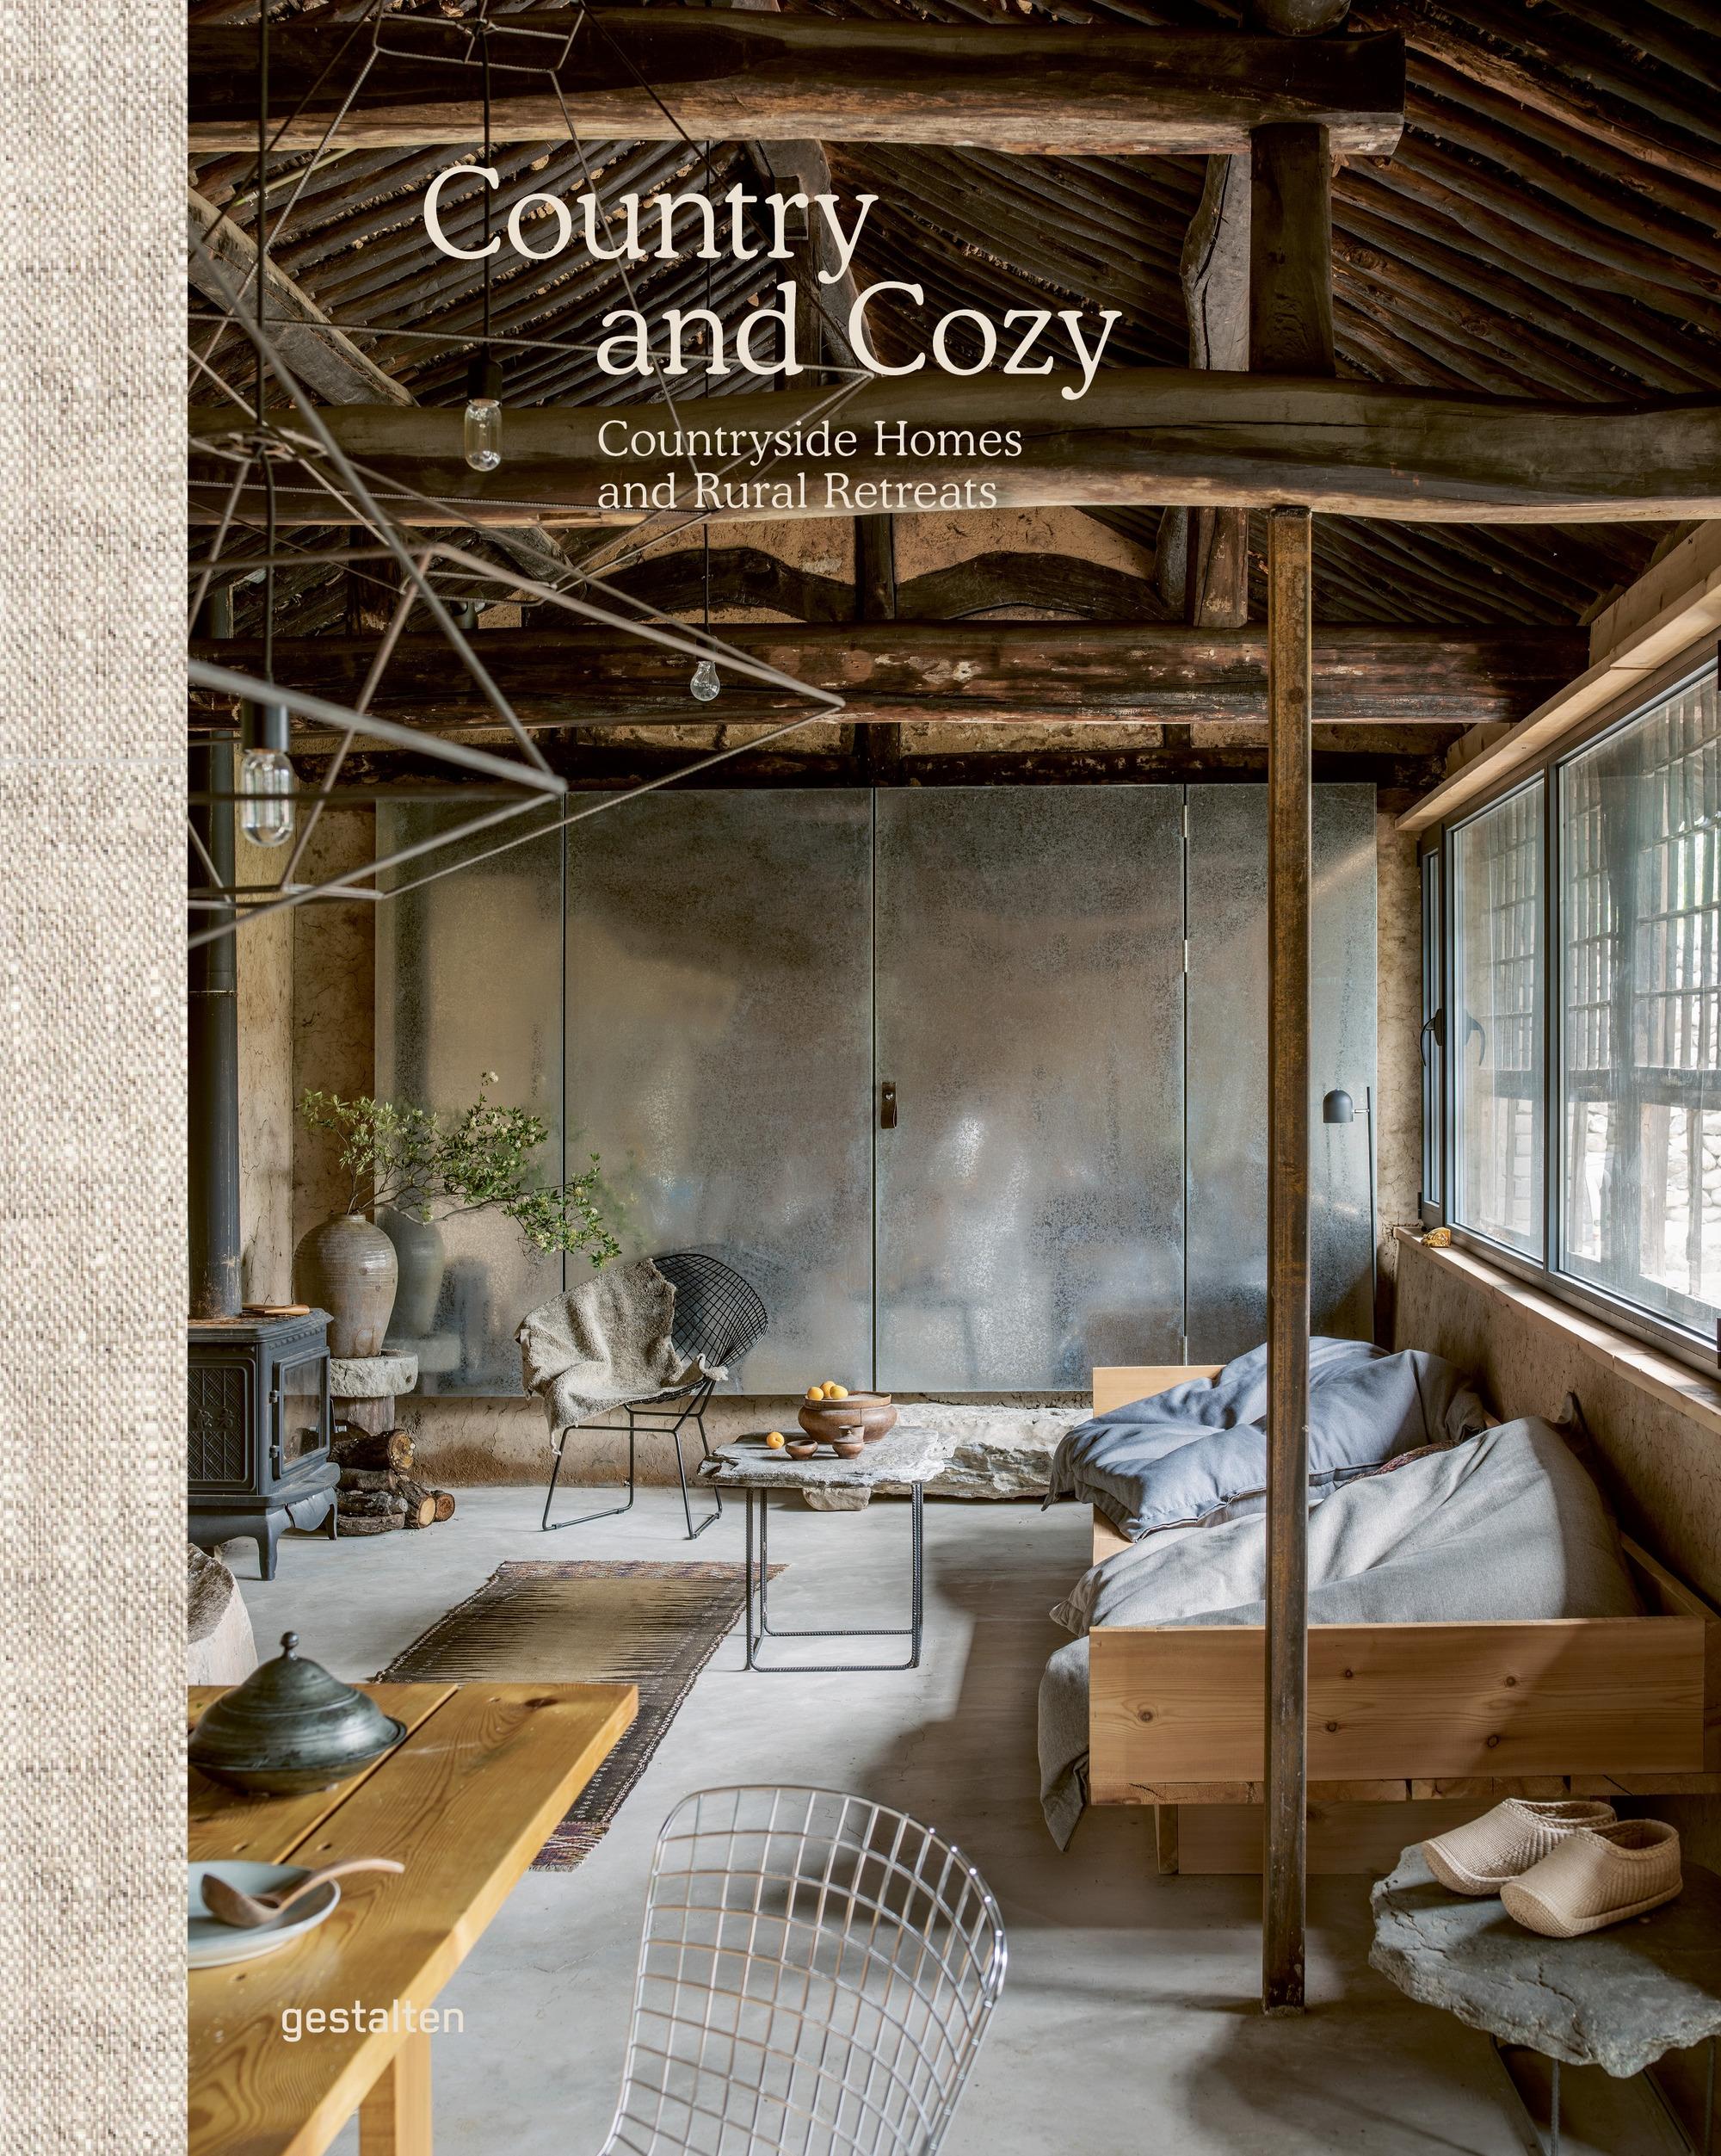 COUNTRY AND COZY. COUNTRYSIDE HOMES AND RURAL RETREATS